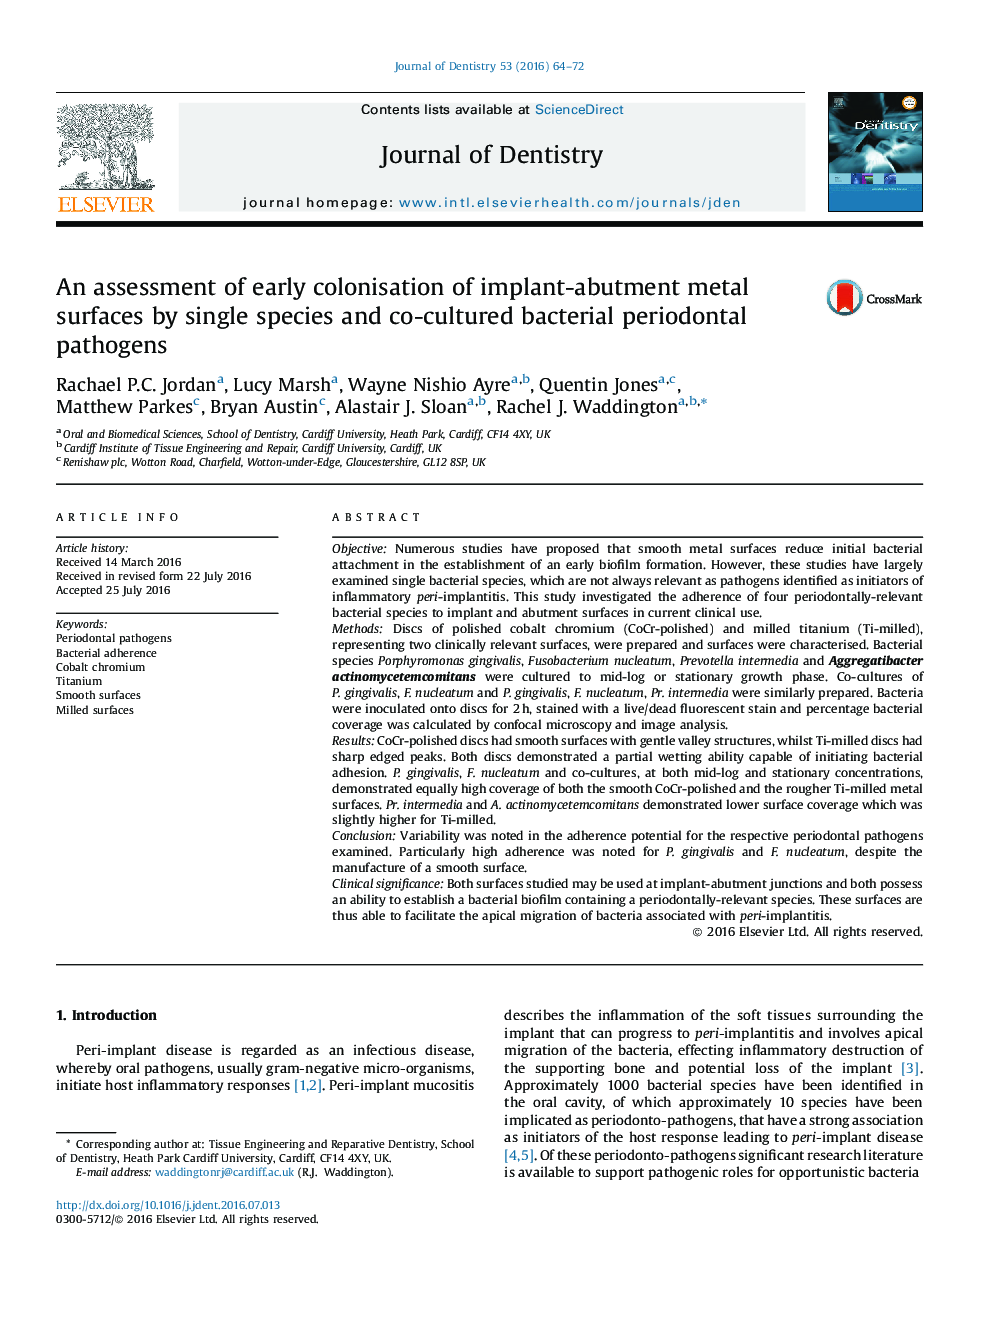 An assessment of early colonisation of implant-abutment metal surfaces by single species and co-cultured bacterial periodontal pathogens